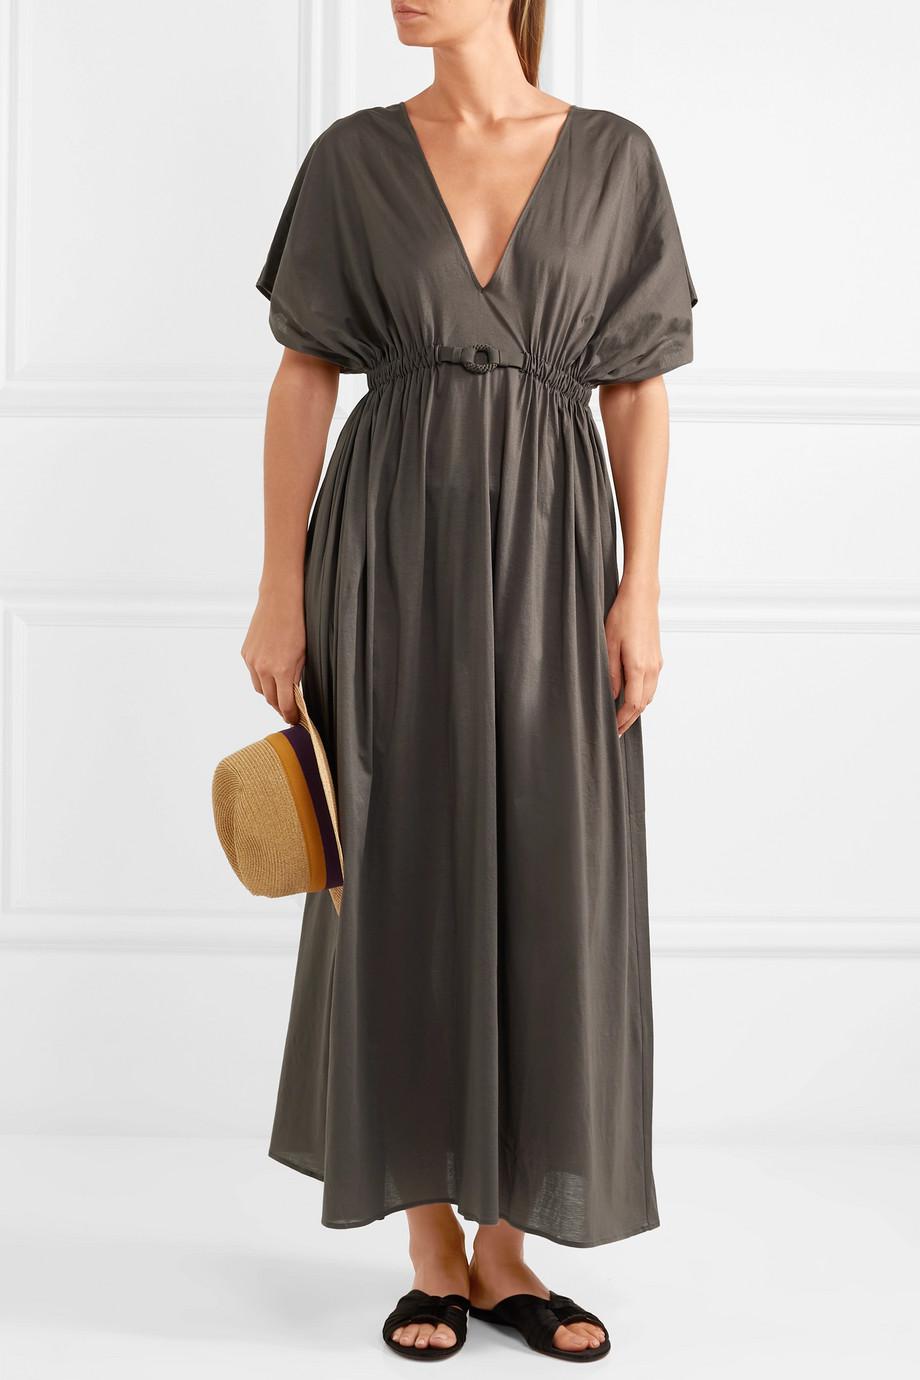 Lyst - Eres Norma Cotton-jersey Maxi Dress in Gray